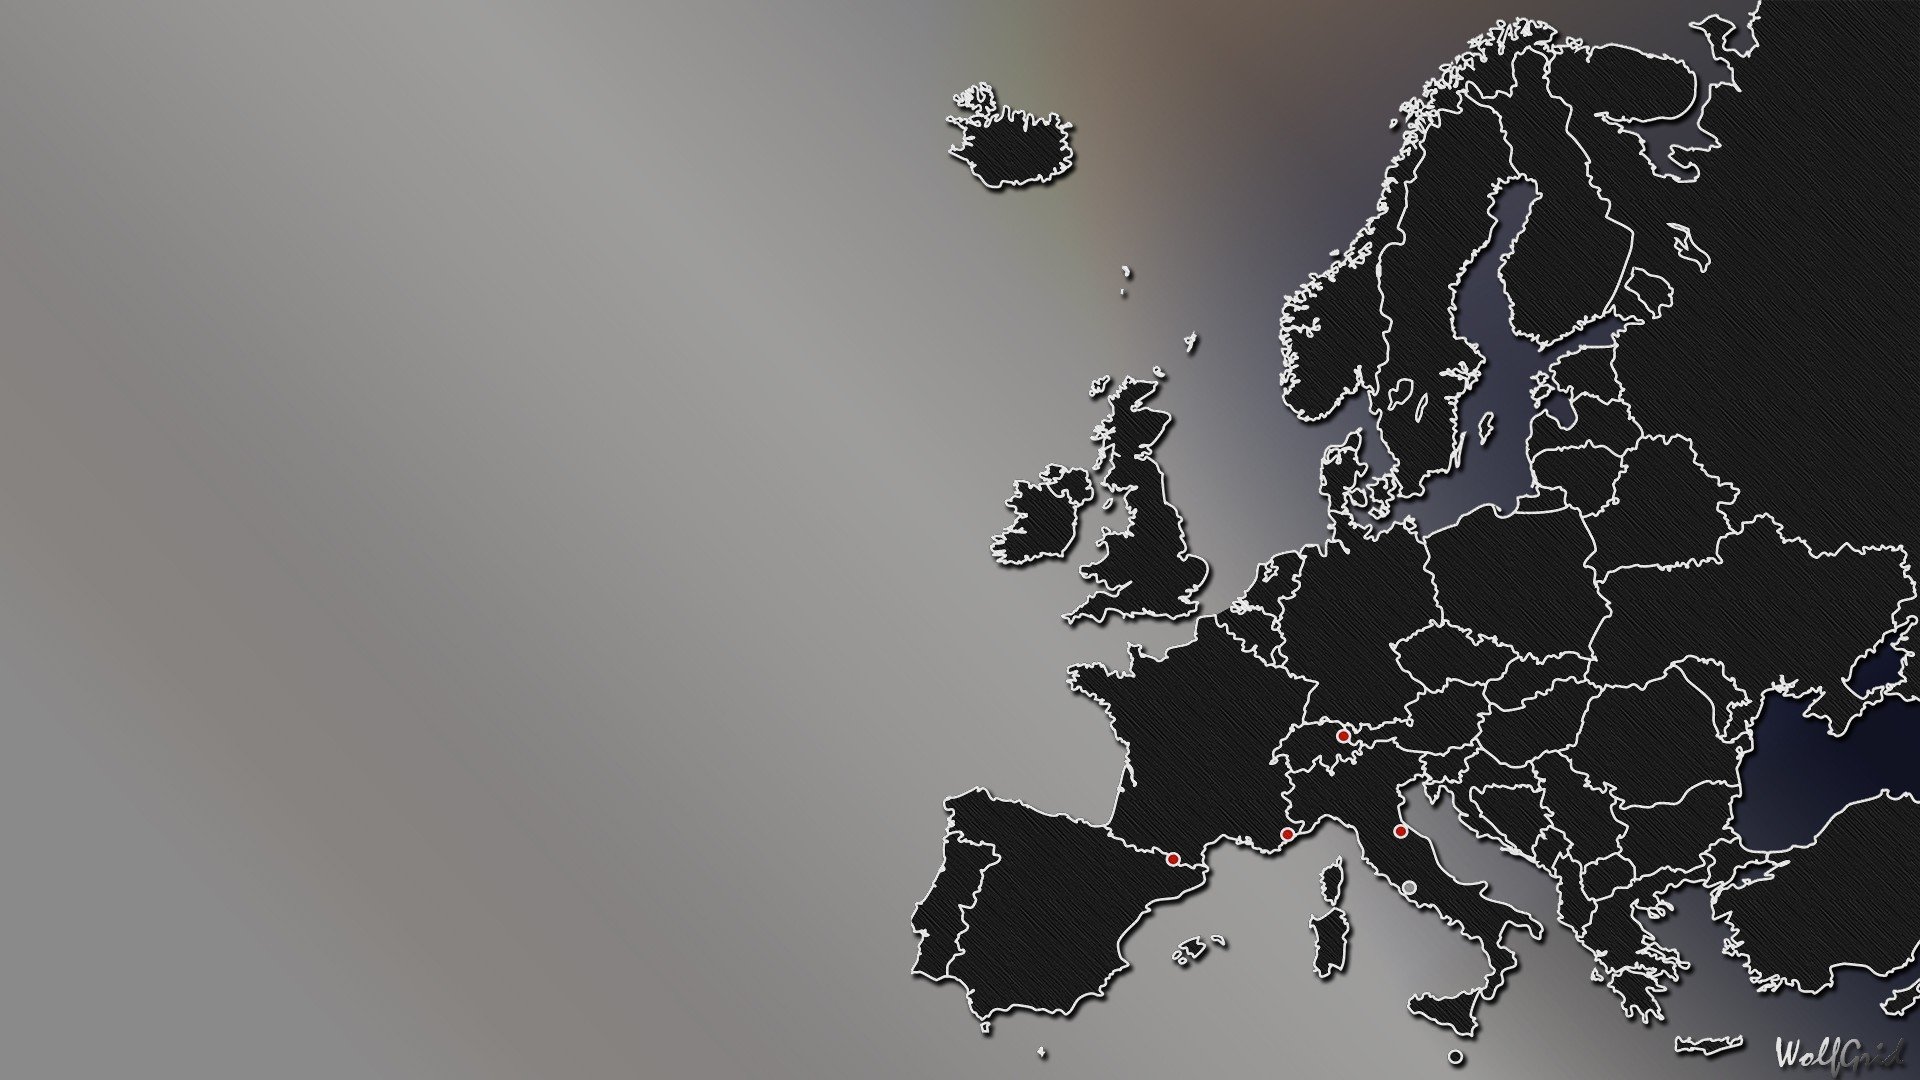 Europe Map Hd Wallpaper Images